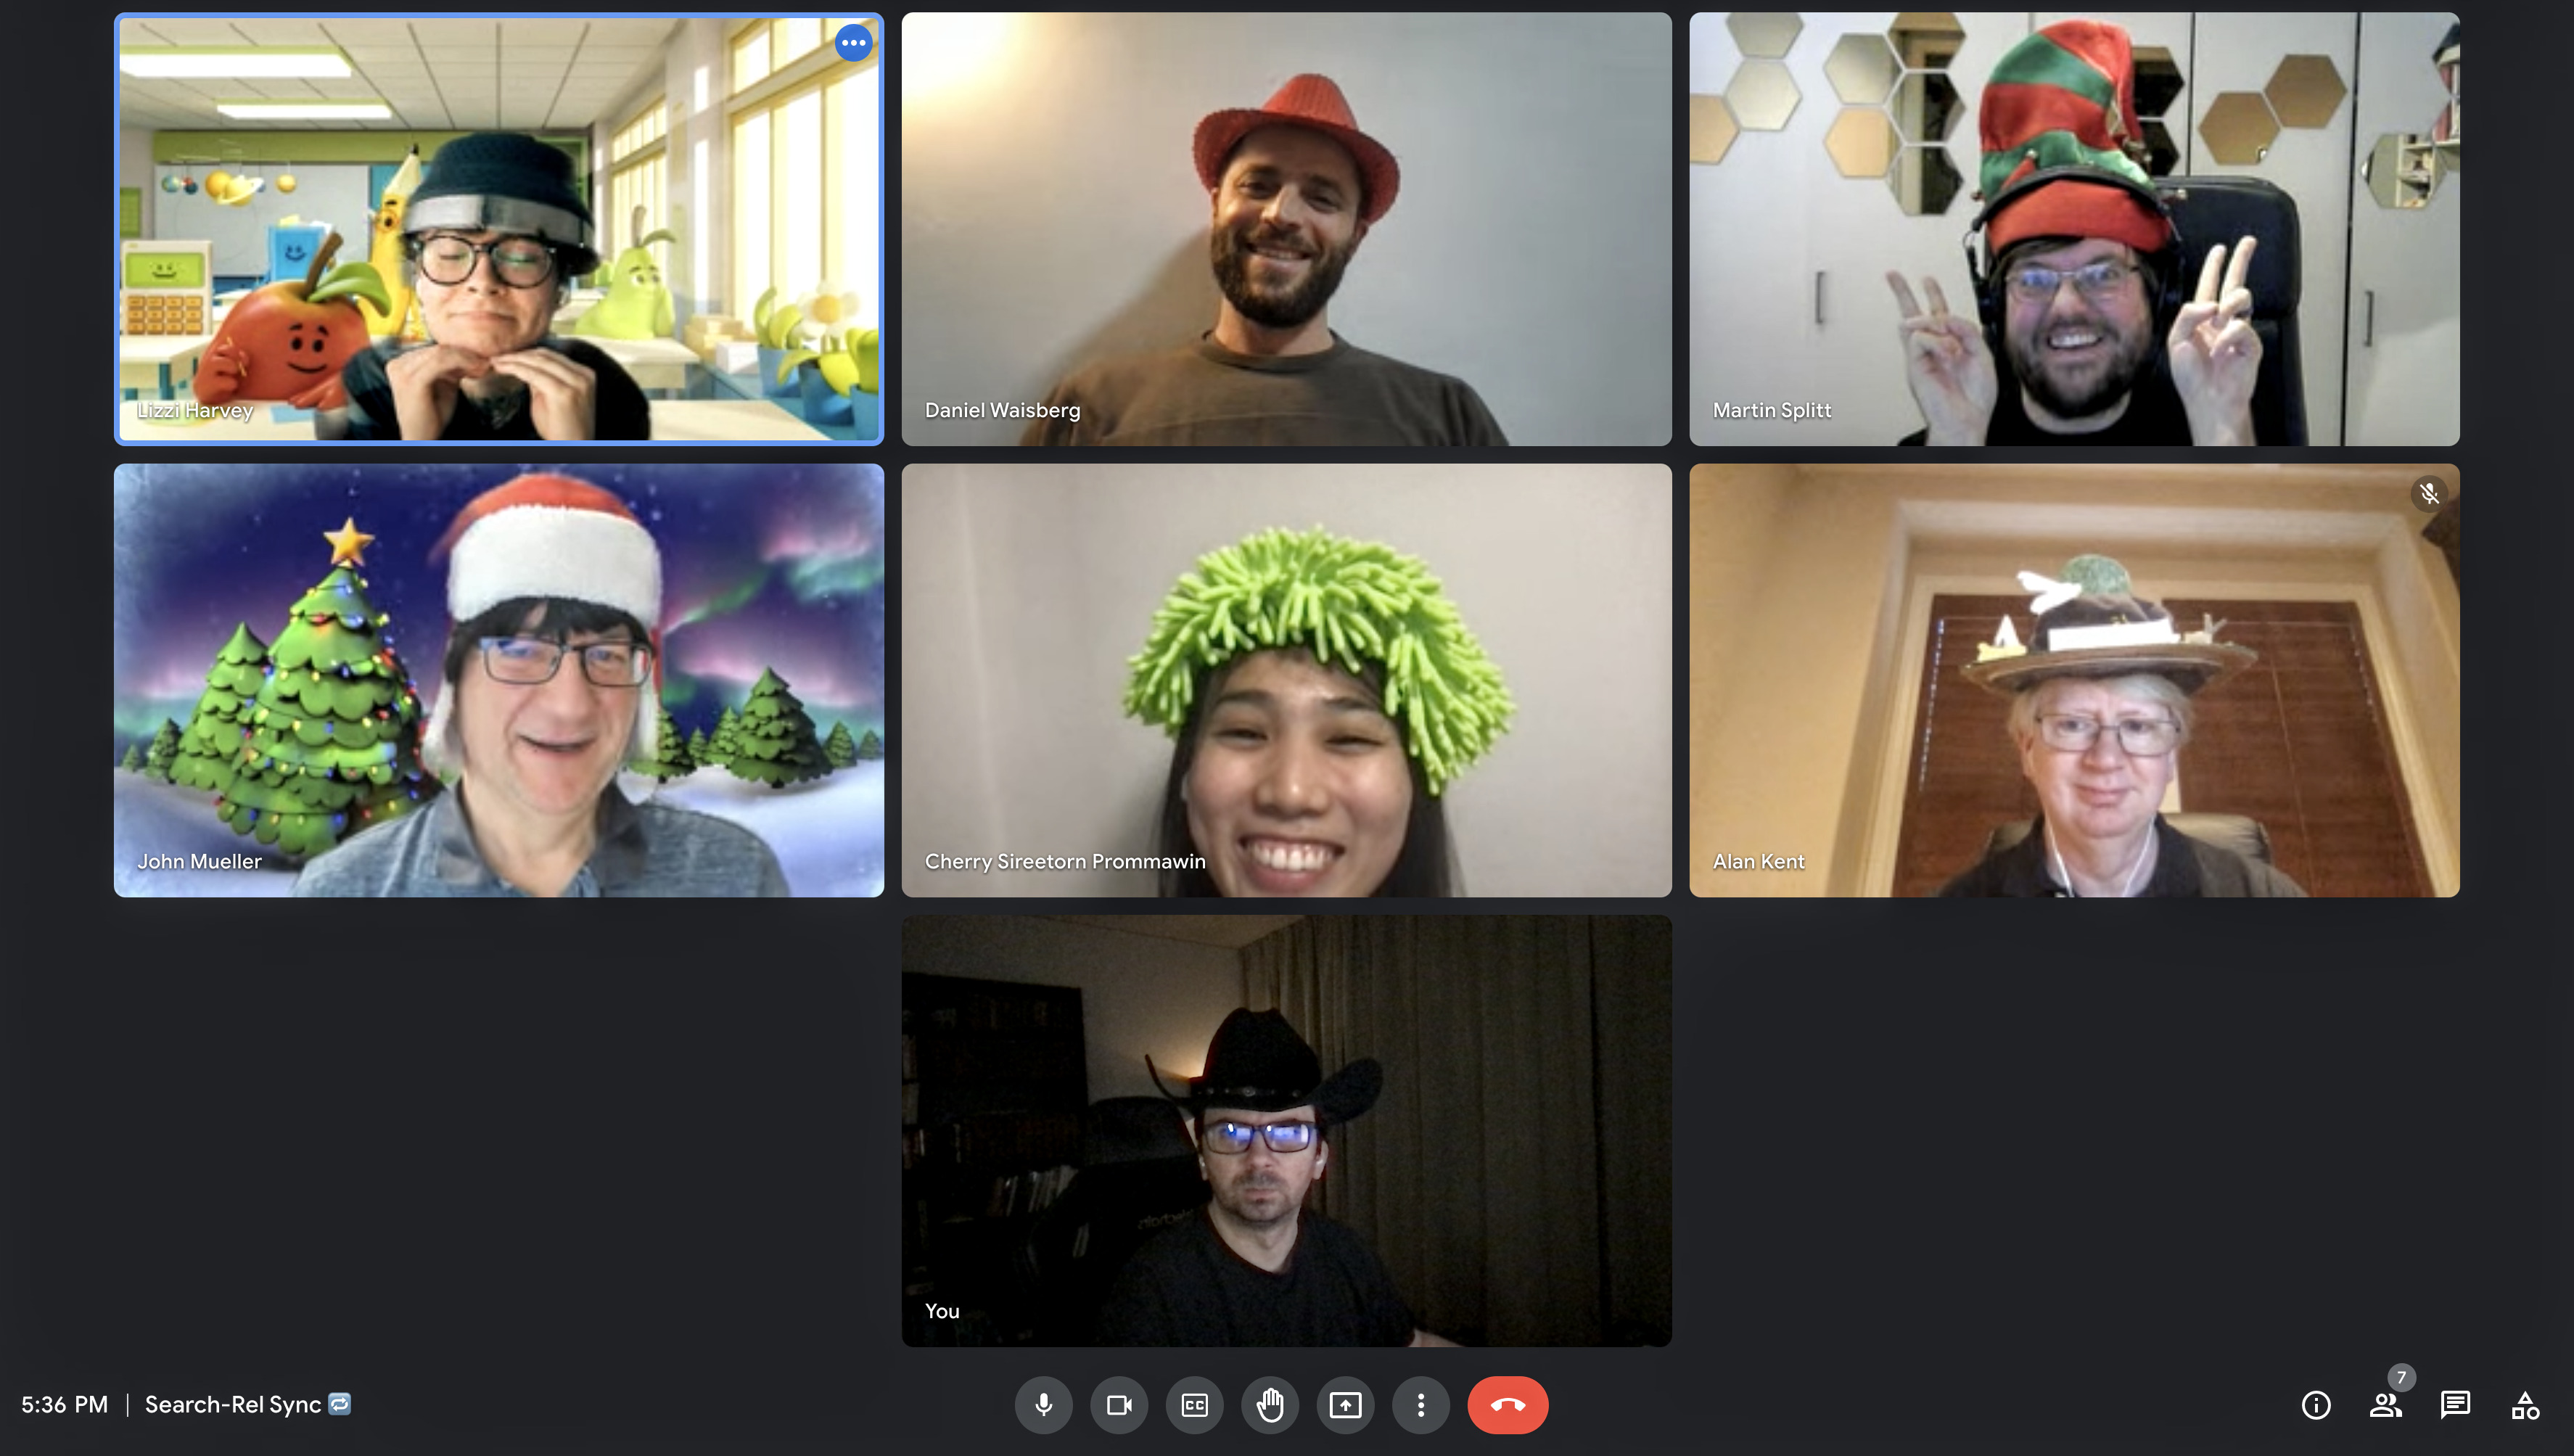 The search relations team in a video meeting